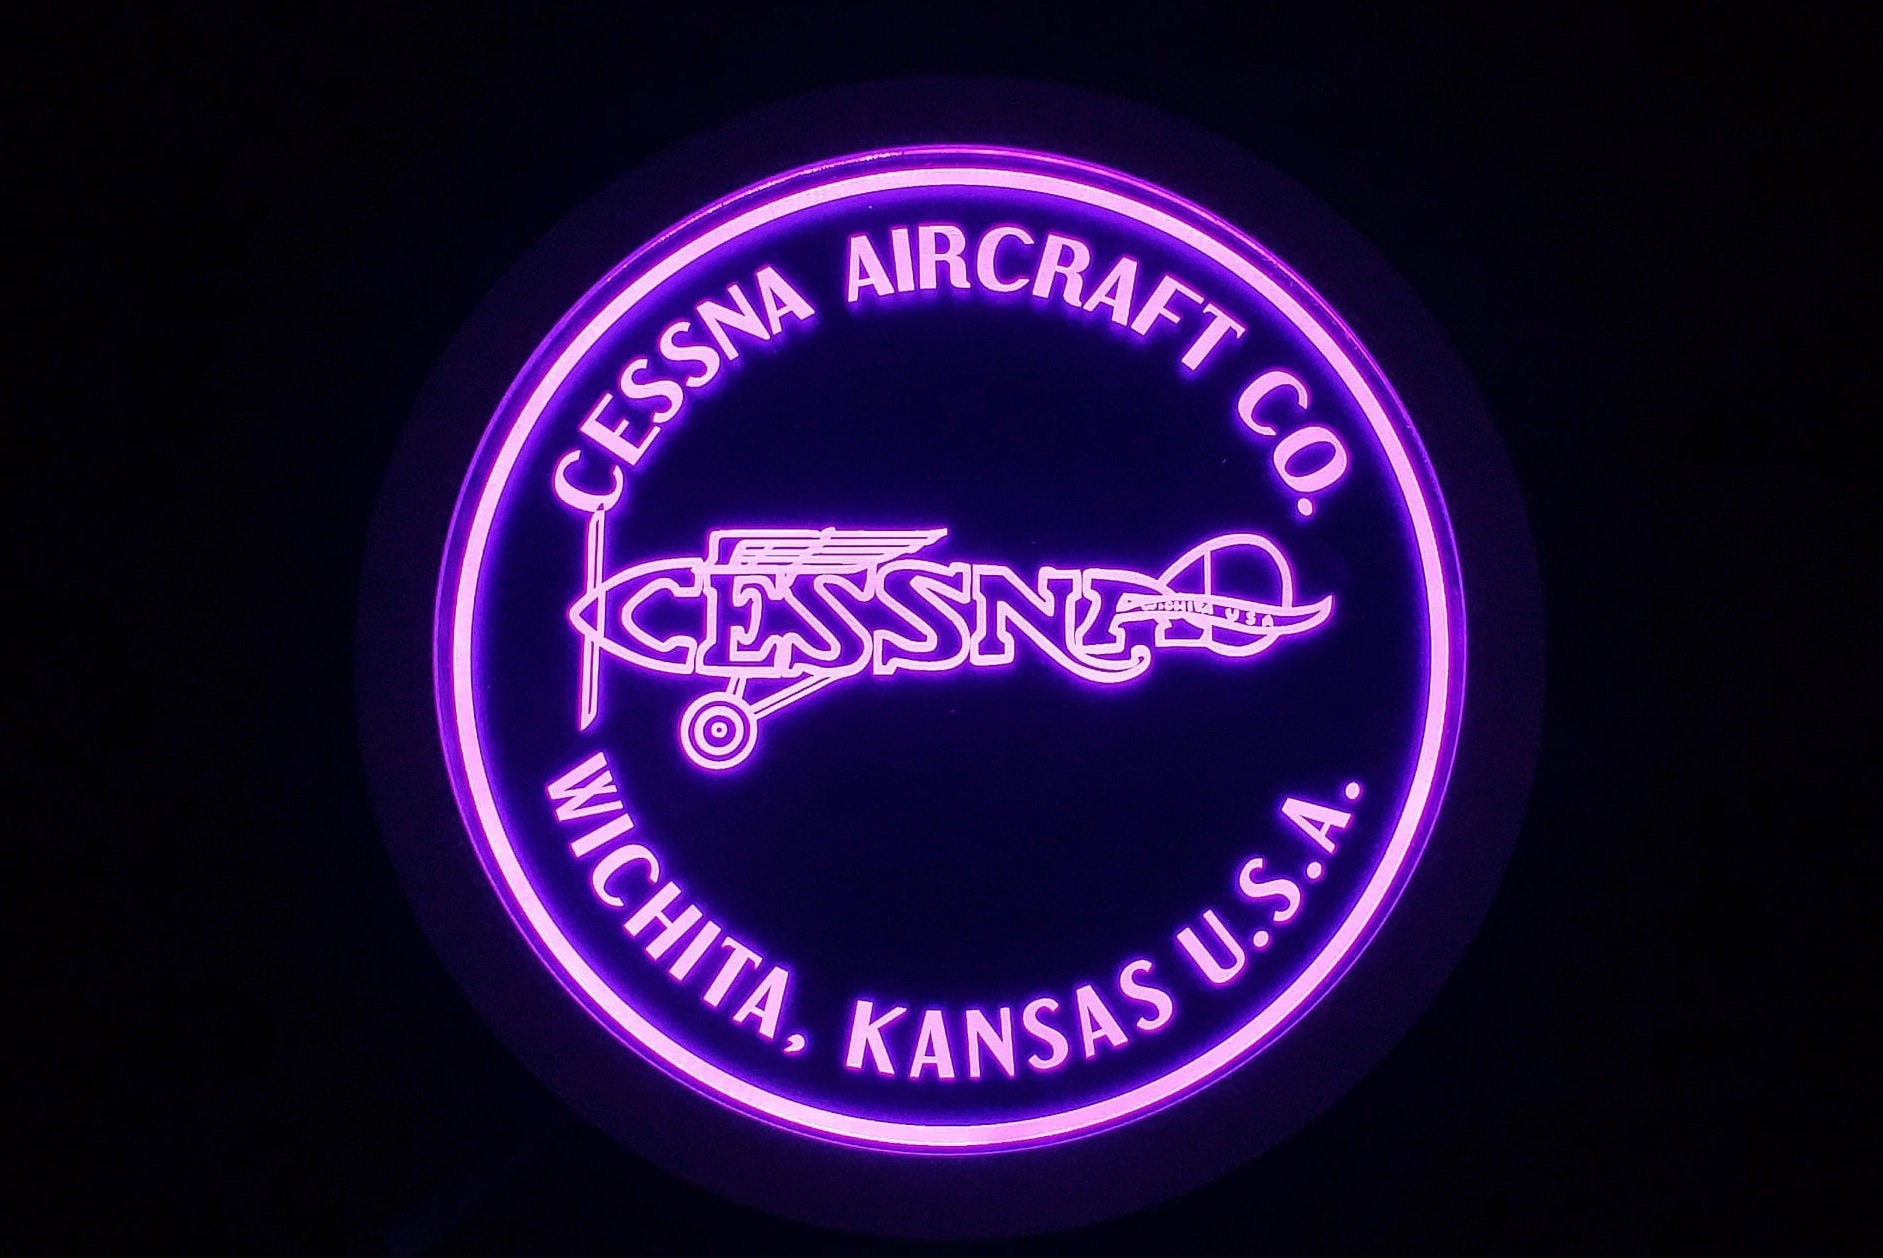 Vintage Cessna wall mounted round logo LED light lamp/sign - Neon-like - Free shipping - Made in USA.